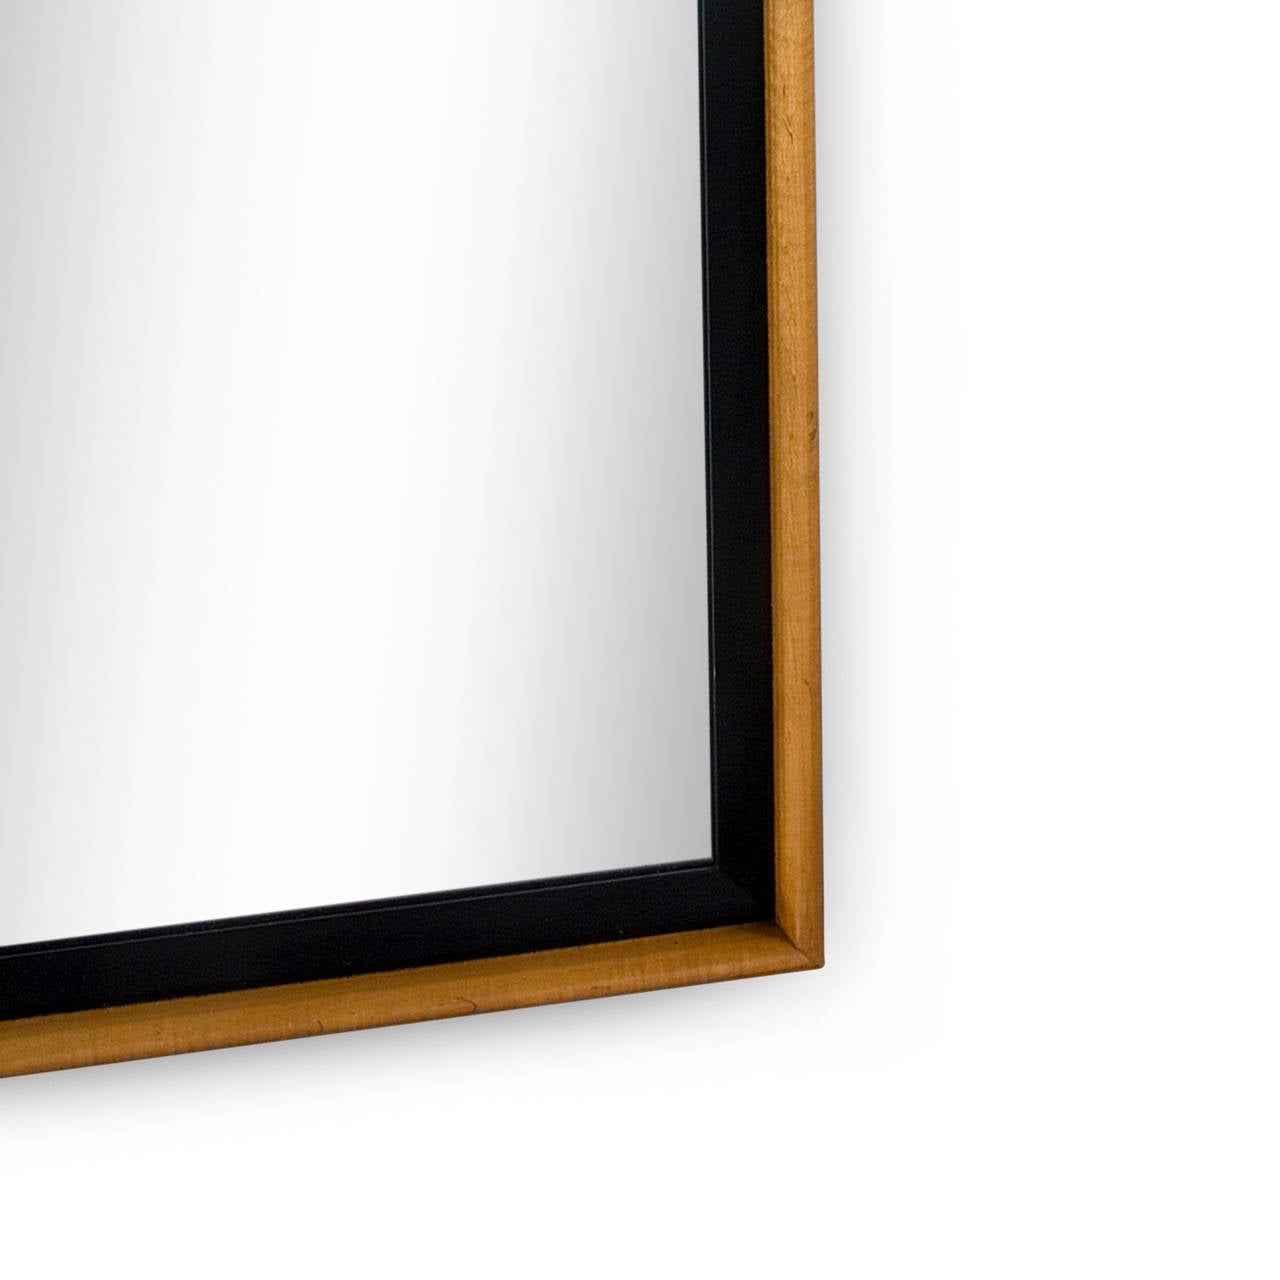 Deep frame two-tone rectangular mirror, in a medium maple with ebonized recess, by Paul Frankl for Johnson Furniture, American, 1950s. Dimensions: 51 in x 31 in, depth 2 in.